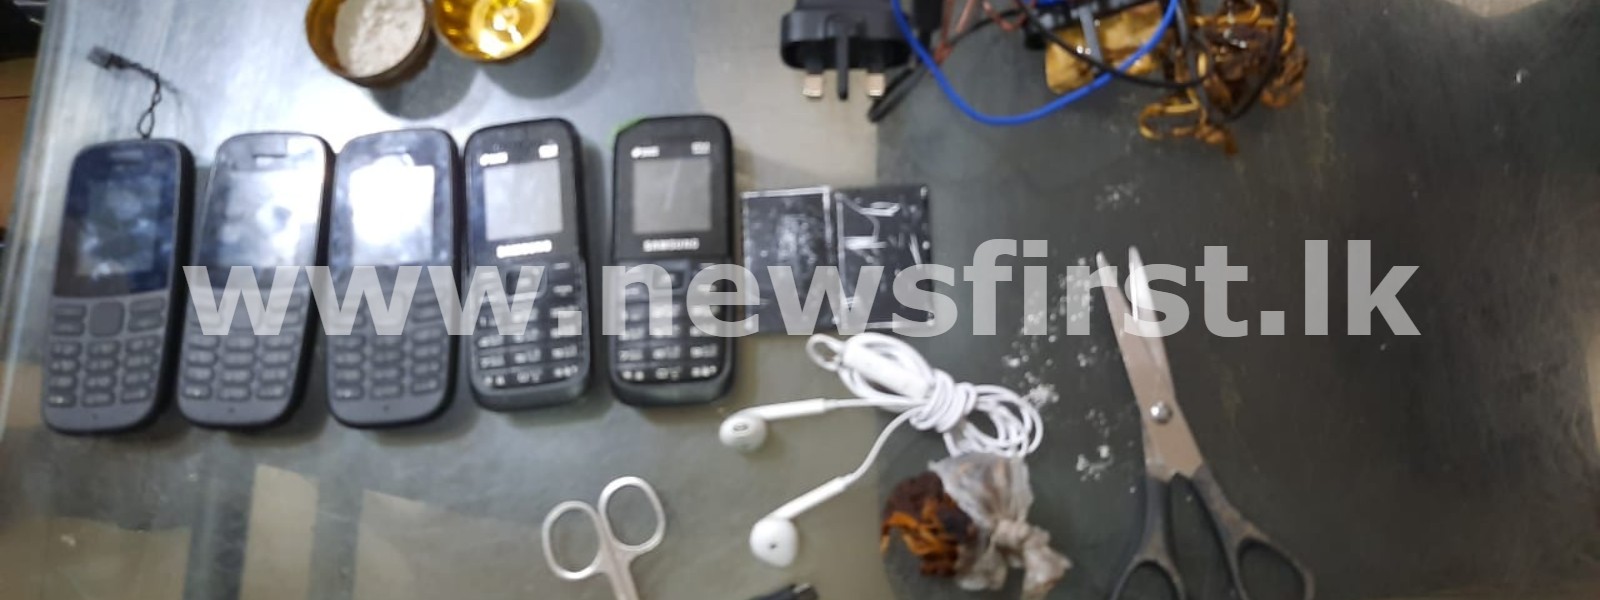 05 mobile phones discovered from Colombo Remand Prison